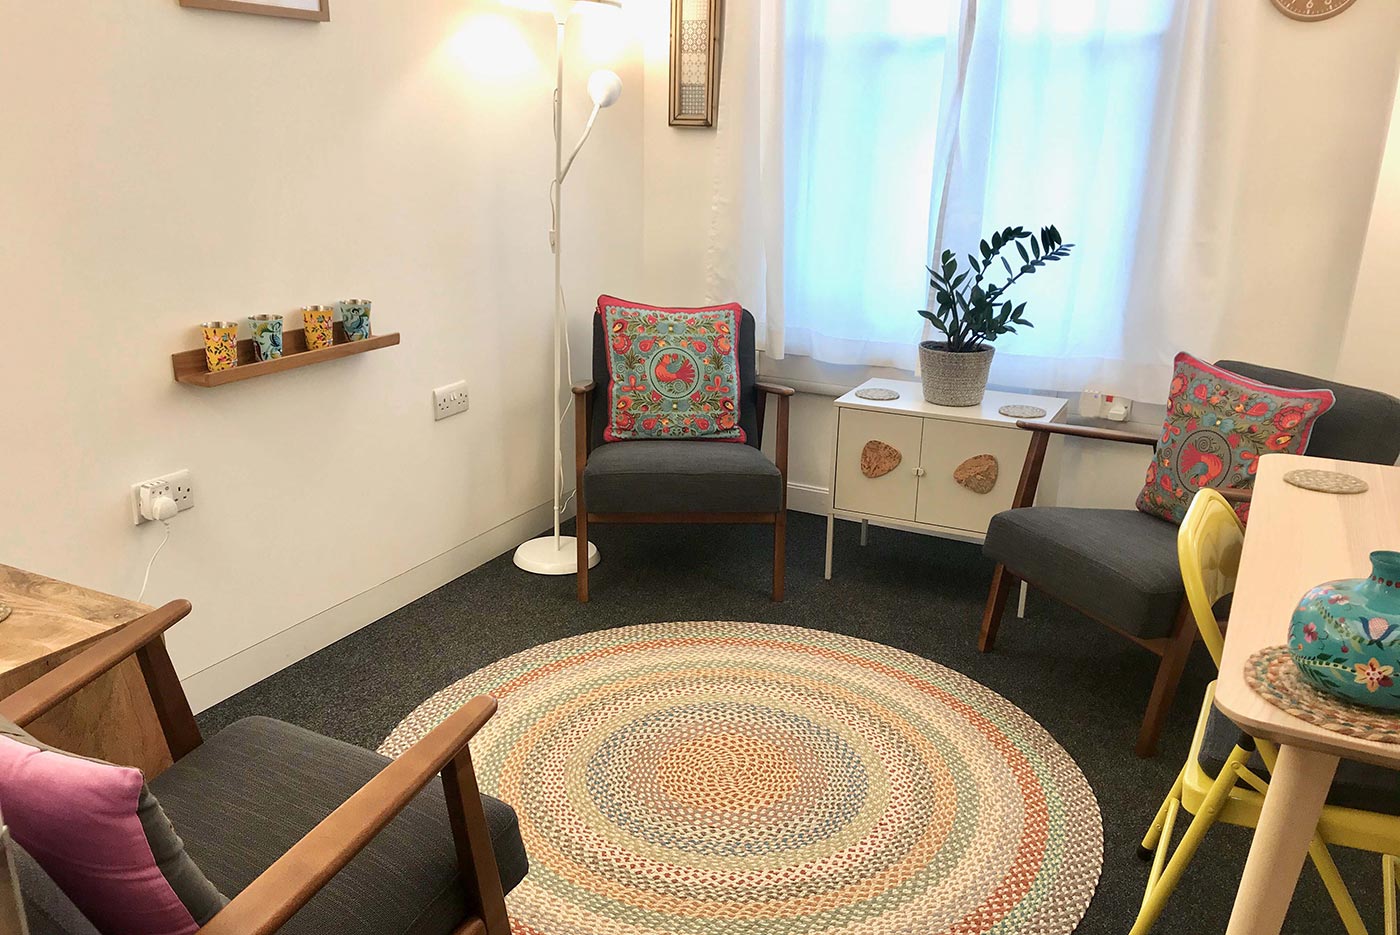 King's Cross Road Room 302: 2 arm chairs, rug, table and chair, lamp, cabinet and plant